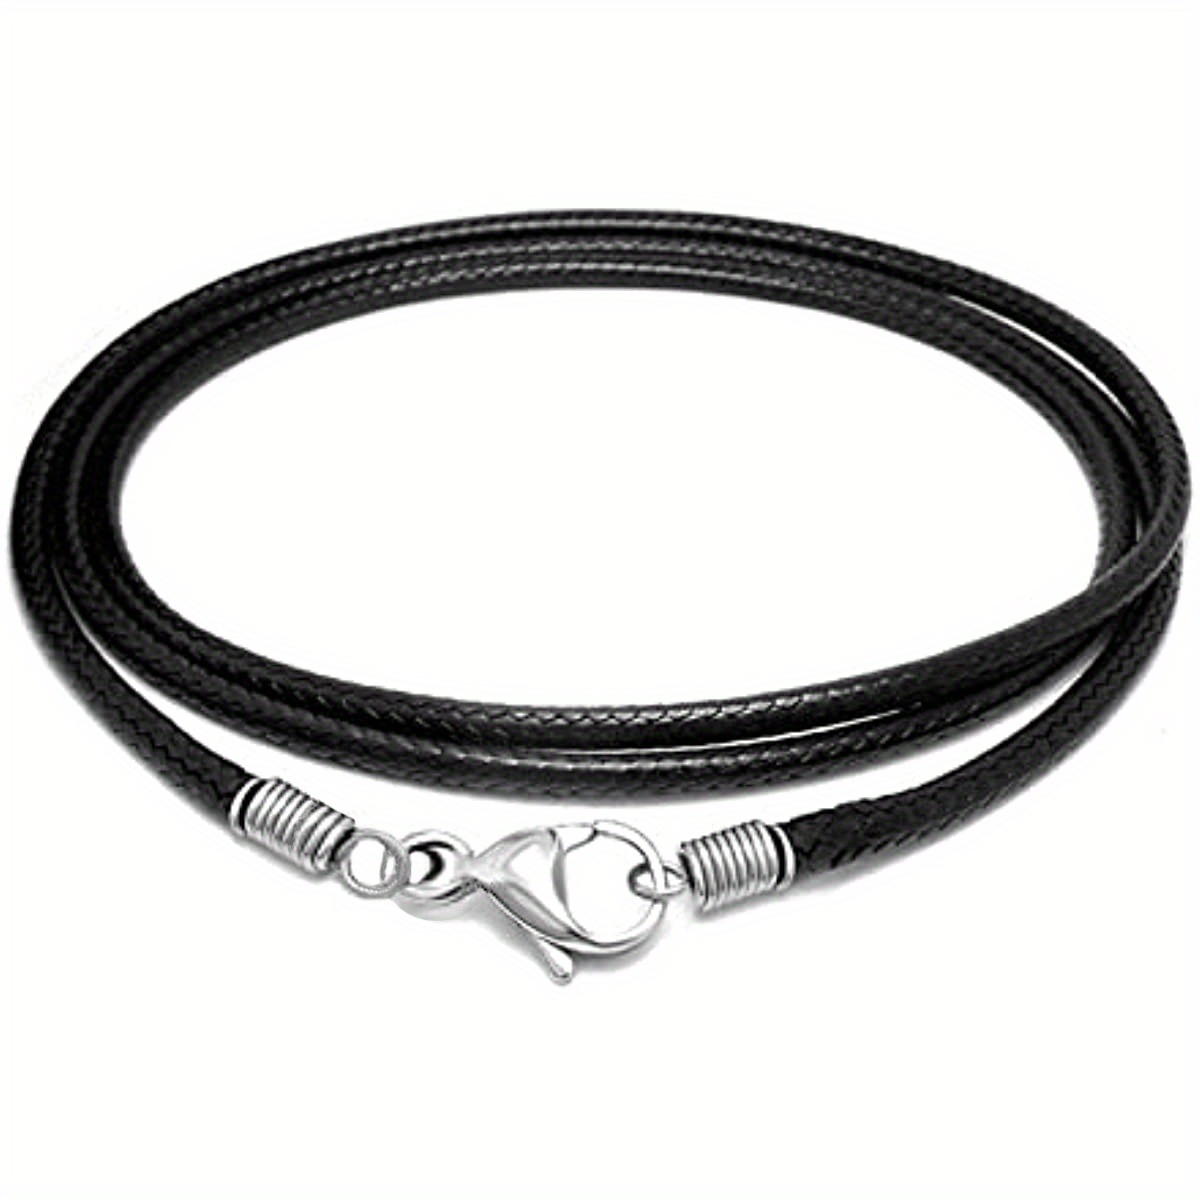 Black Leather Cord Necklace Rope Chain with Stainless Steel Clasp, 4mm, 14-30 inch, 26.0 Inches